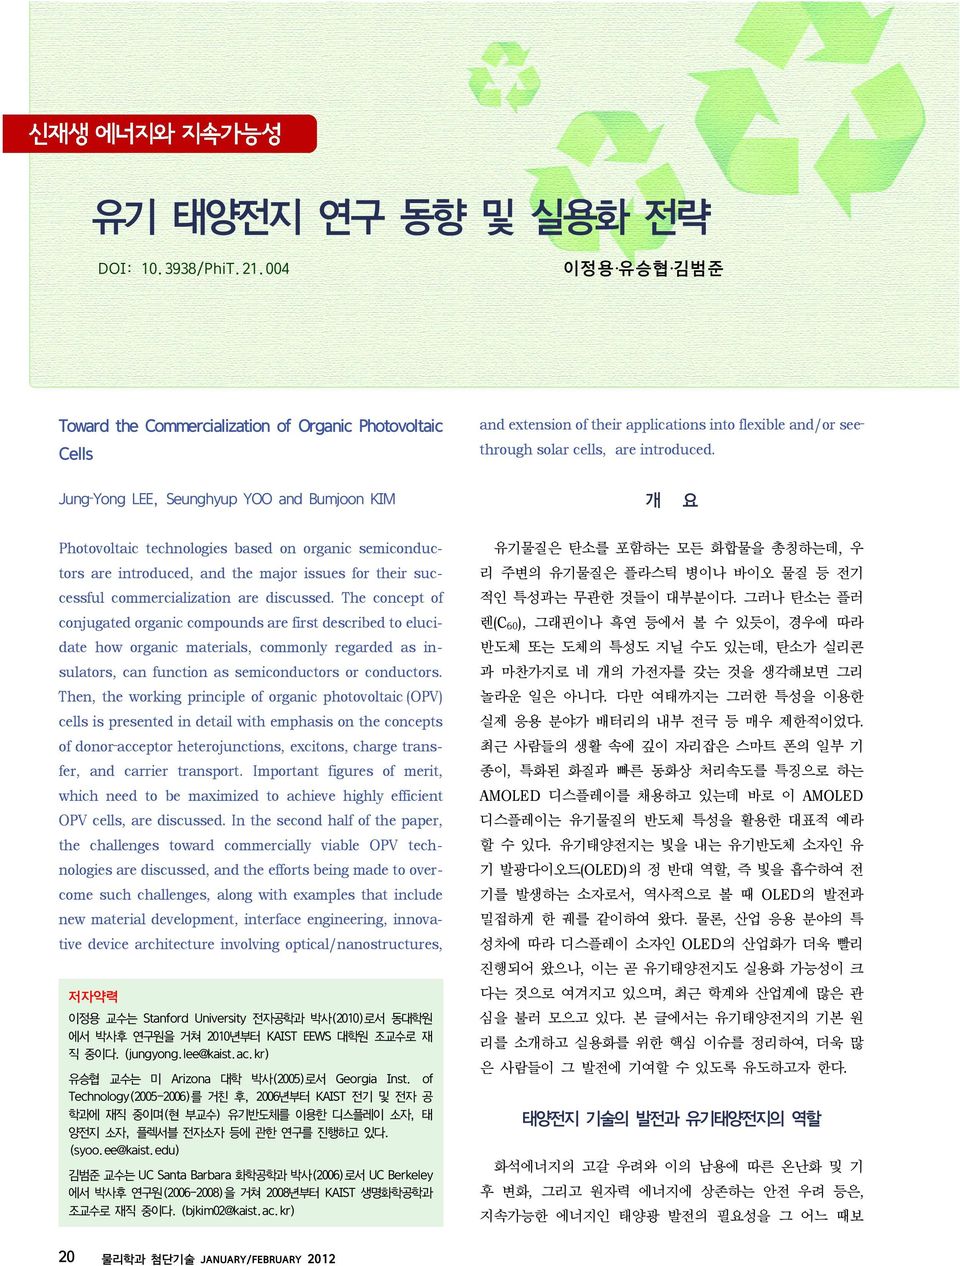 Jung Yong LEE, Seunghyup YOO and Bumjoon KIM 개 요 Photovoltaic technologies based on organic semiconduc- 유기물질은 탄소를 포함하는 모든 화합물을 총칭하는데, 우 tors are introduced, and the major issues for their suc- 리 주변의